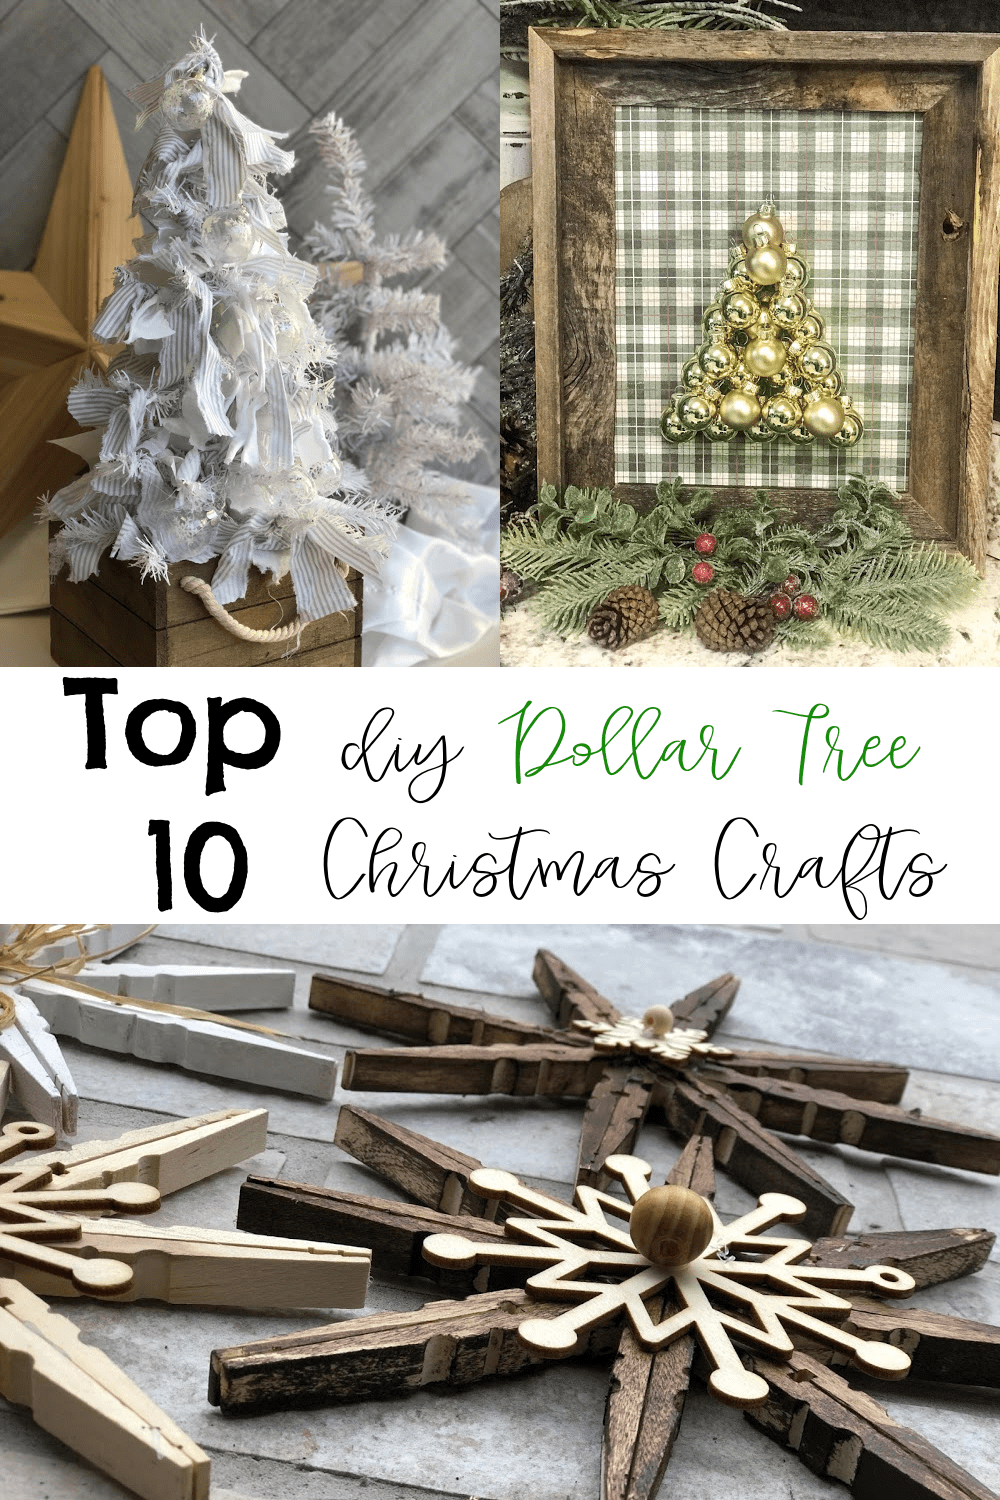 Top 10 Dollar Tree Christmas Projects - Re-Fabbed -   16 diy christmas decorations dollar tree 2020 ideas